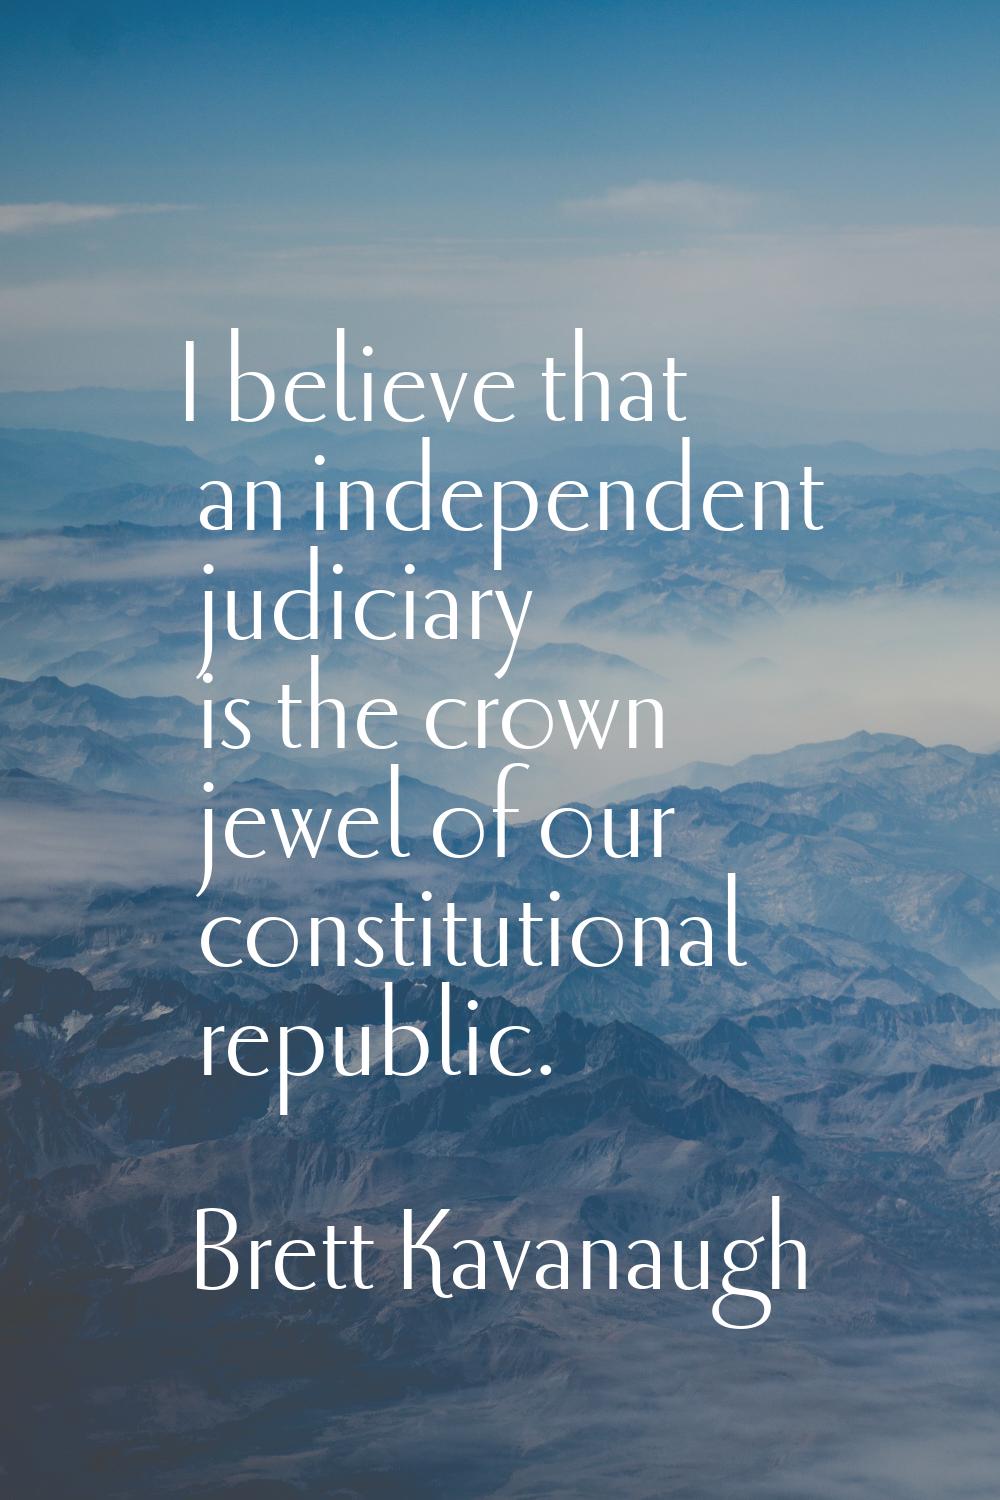 I believe that an independent judiciary is the crown jewel of our constitutional republic.